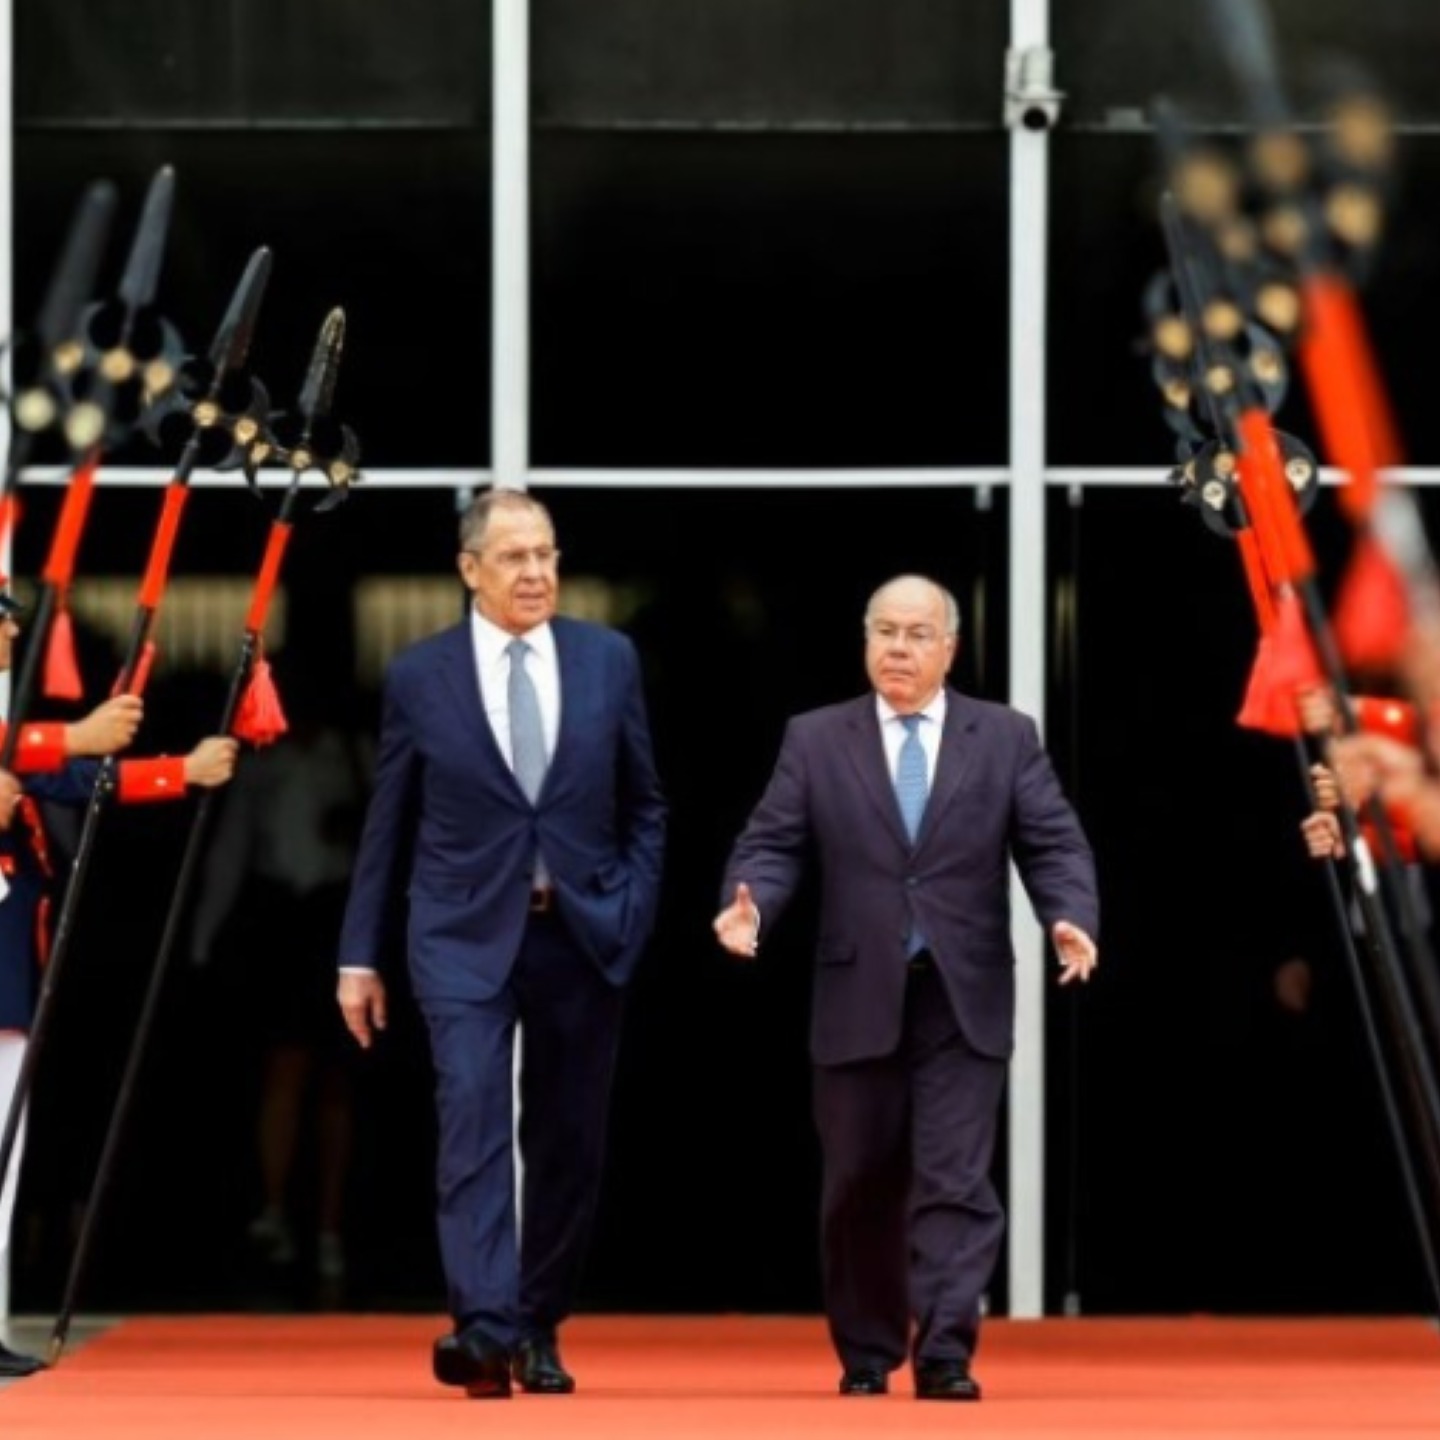 Russia's Foreign Minister Sergey Lavrov Visits Brazil